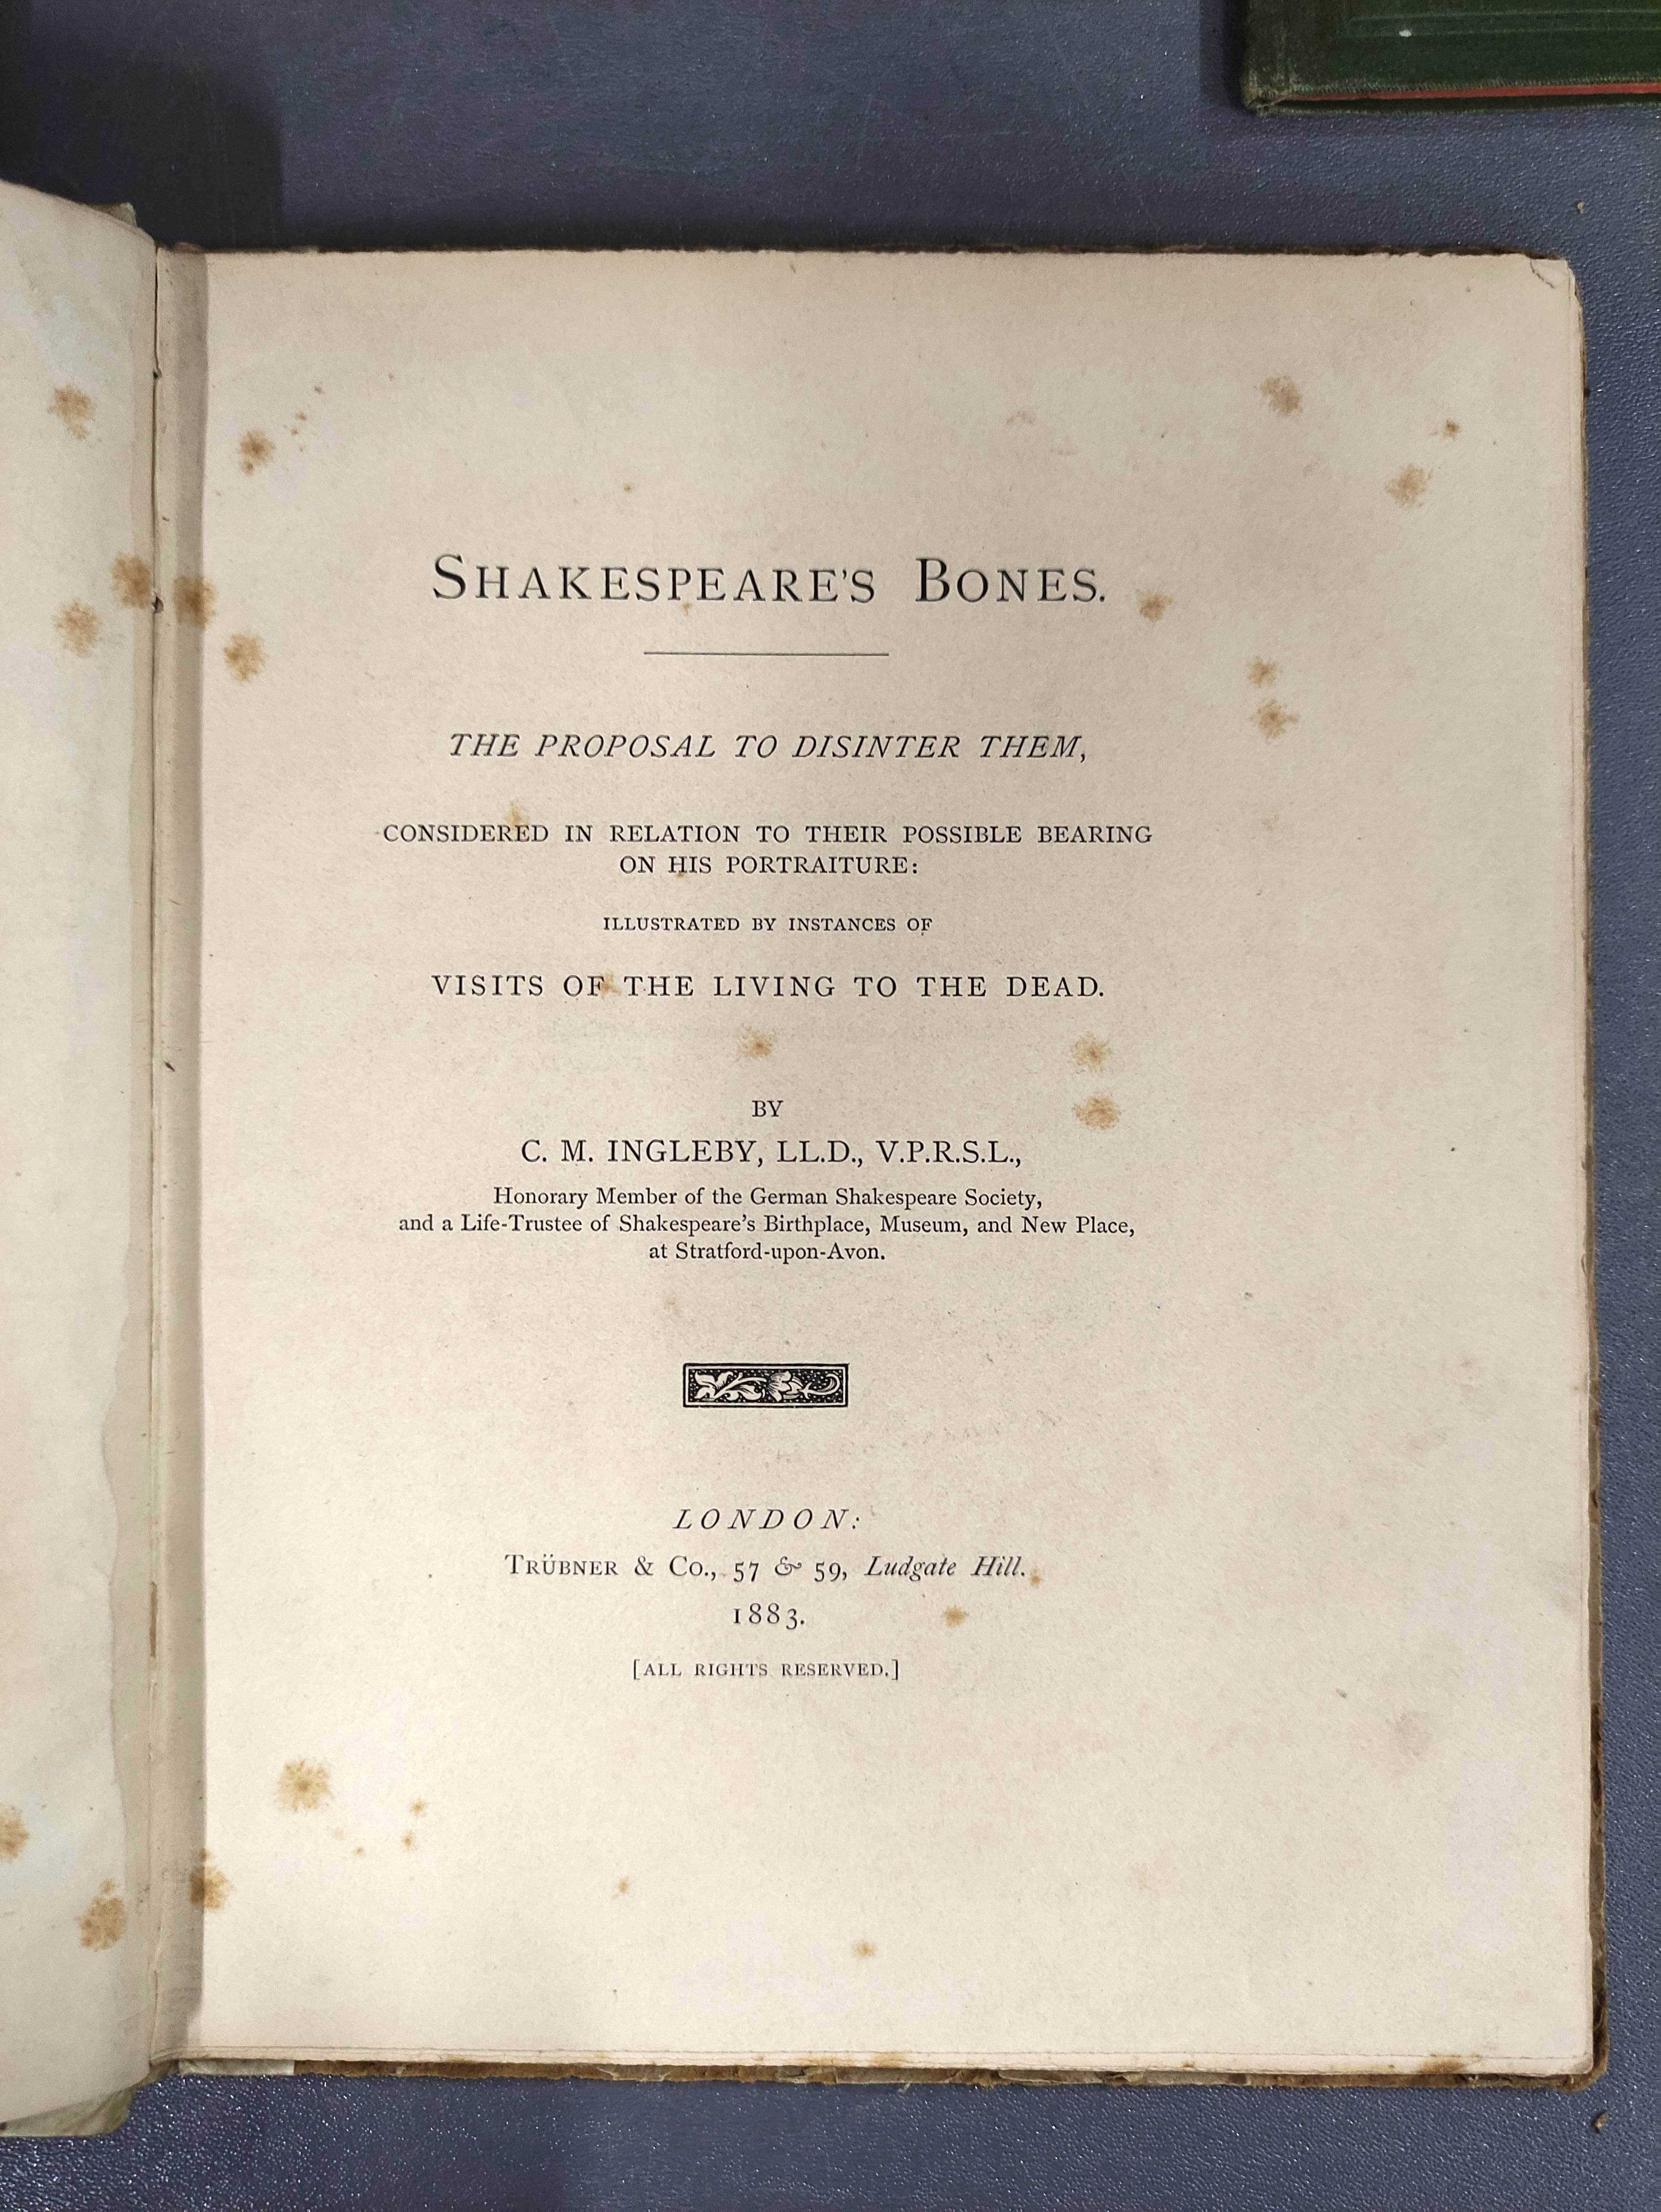 SHAKESPEARE WILLIAM.  6 vols. re. Shakespeare & his works, incl. More About Shakespeare "Forgeries", - Image 3 of 11